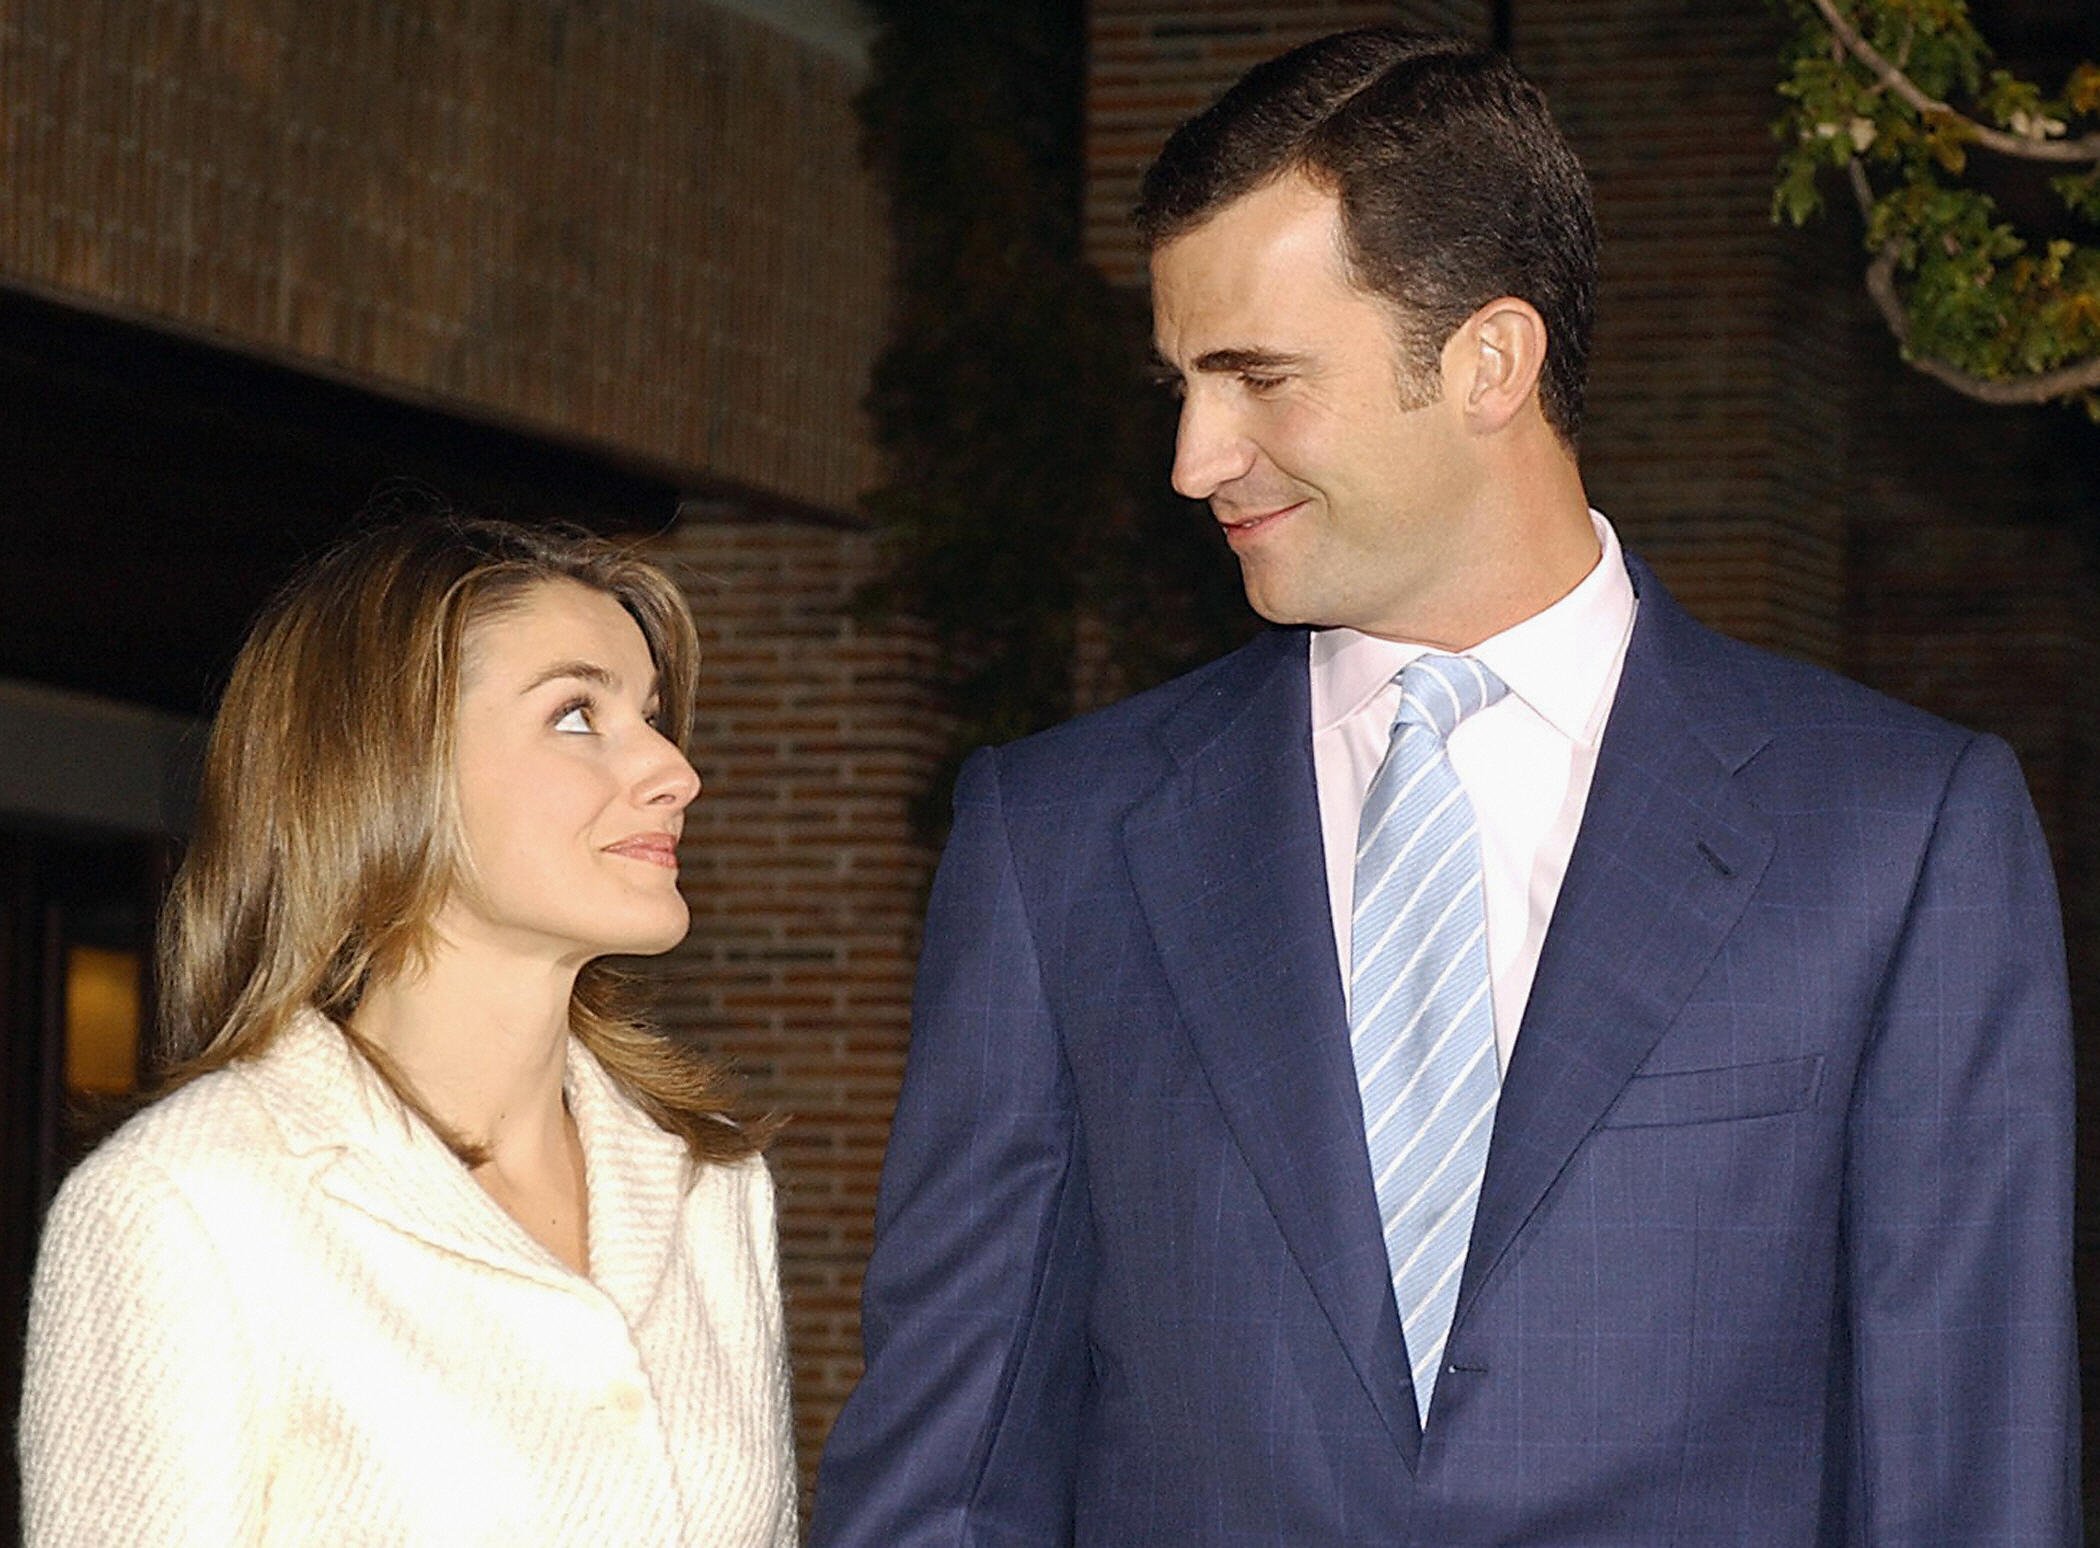 Prince Felipe of Spain poses with his fiancee, Spanish journalist, Letizia Ortiz at Zarzuela Palace, near Madrid, 03 November 2003. | Source: Getty Images